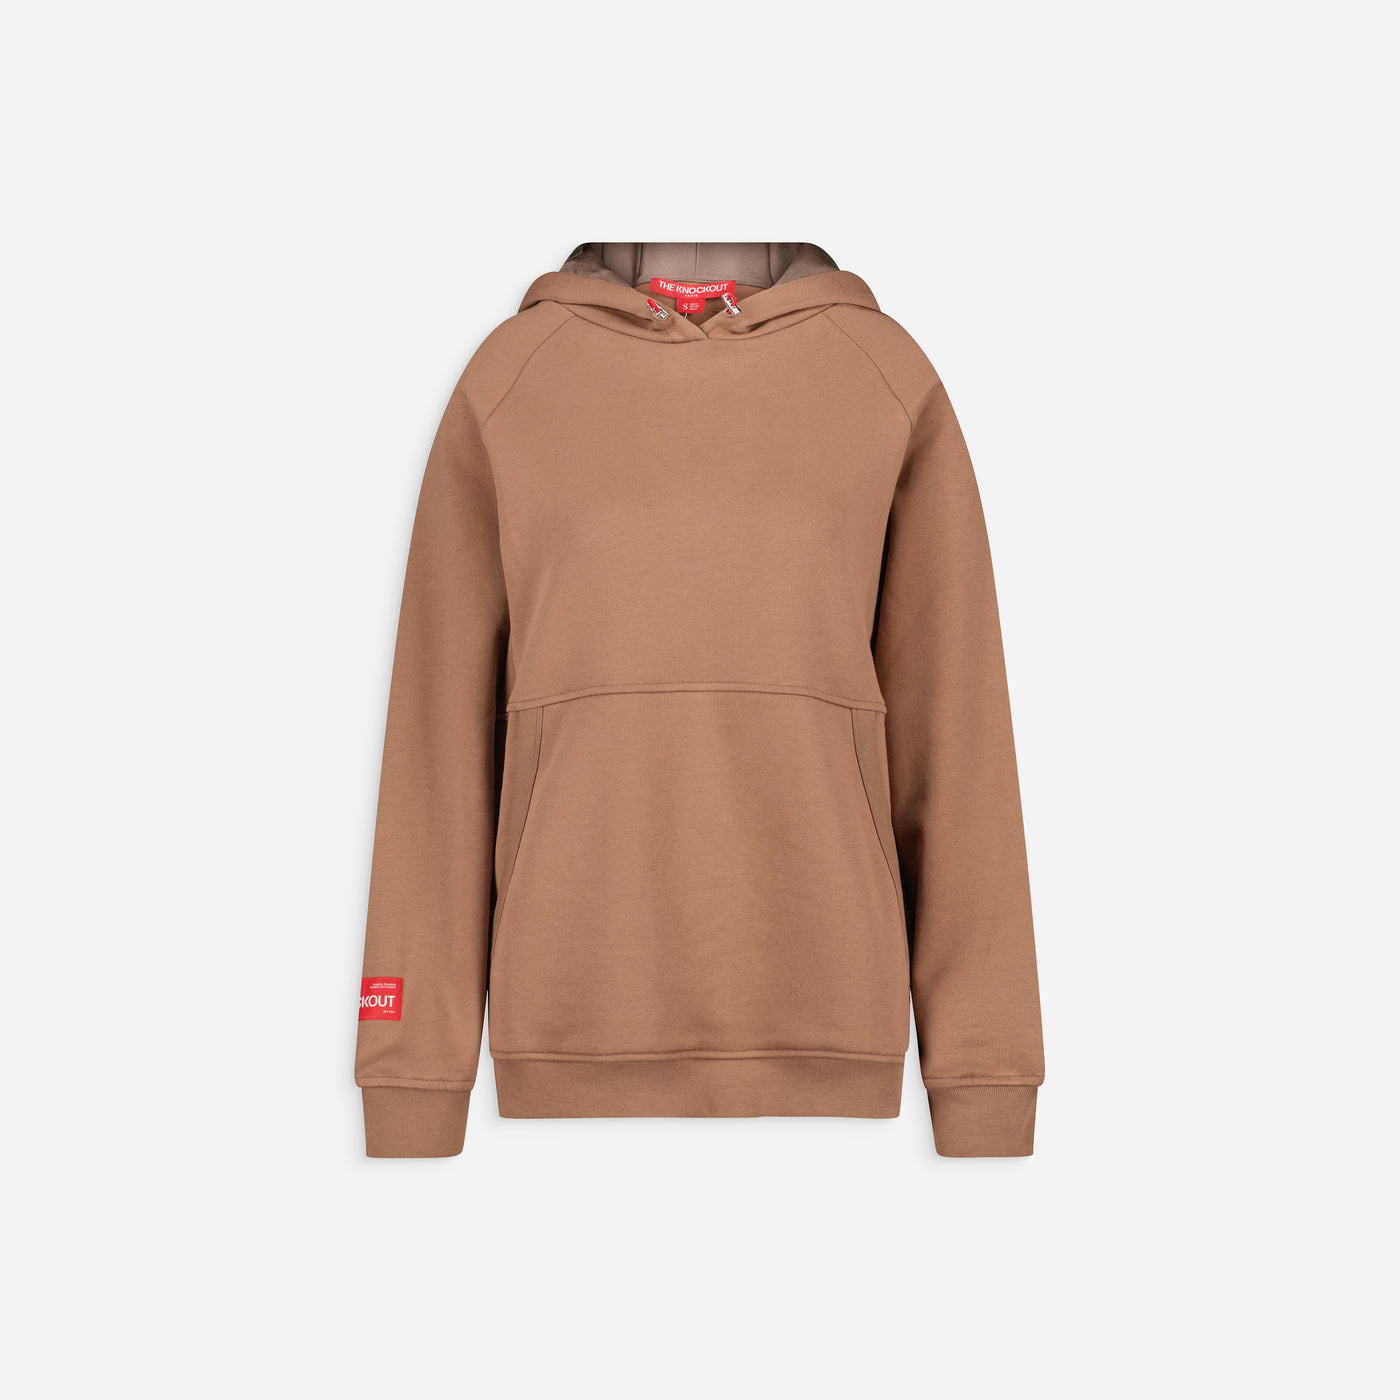 Hoodie The Knockout Paris in chocolate brown